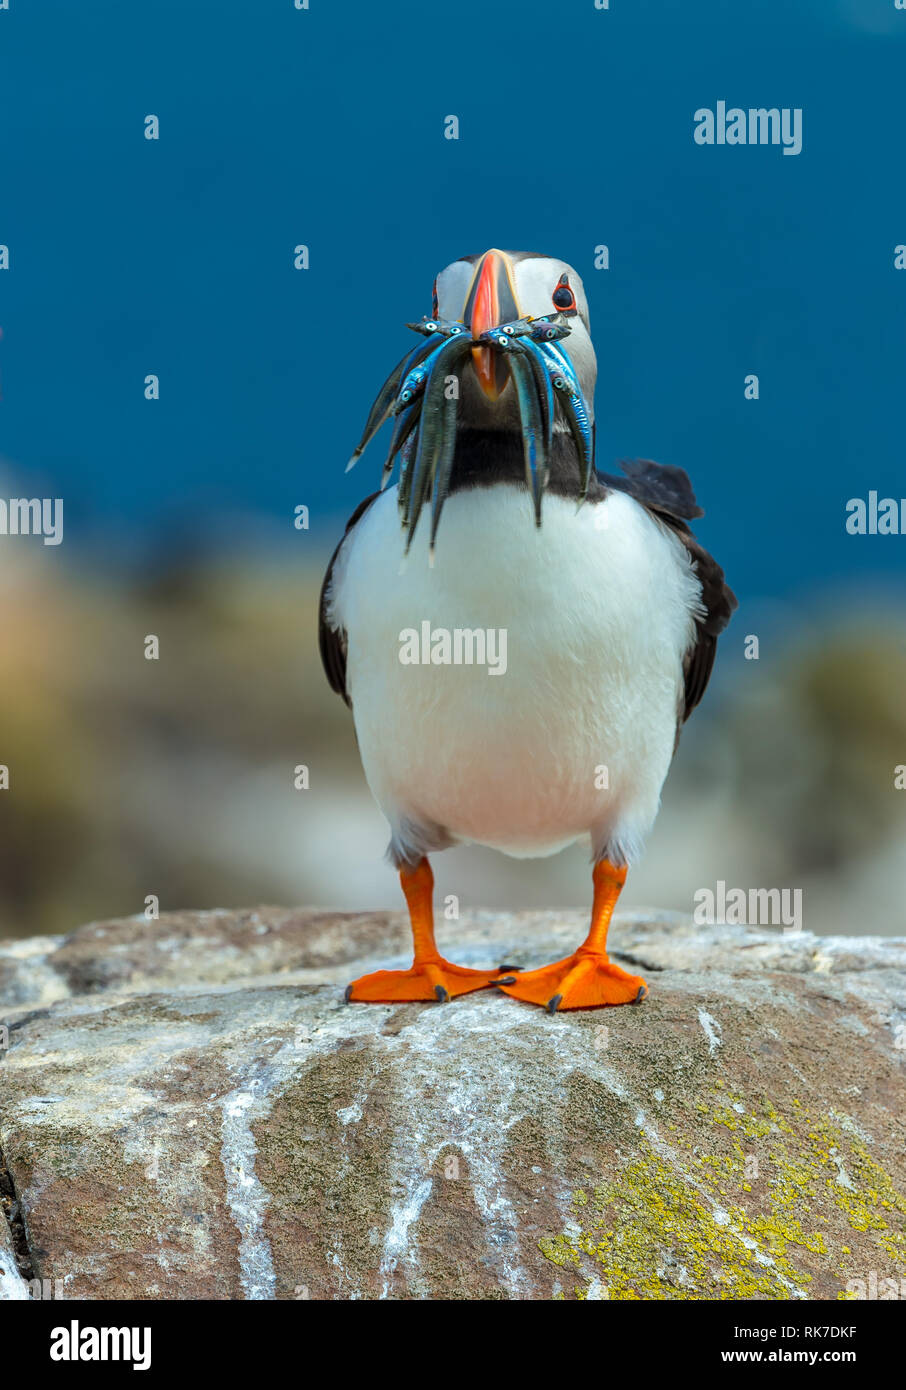 Puffin. Scientific name: Fratercula arctica. Atlantic puffin on a rock with a beak full of sand eels. Facing forward with blue background. Portrait. Stock Photo